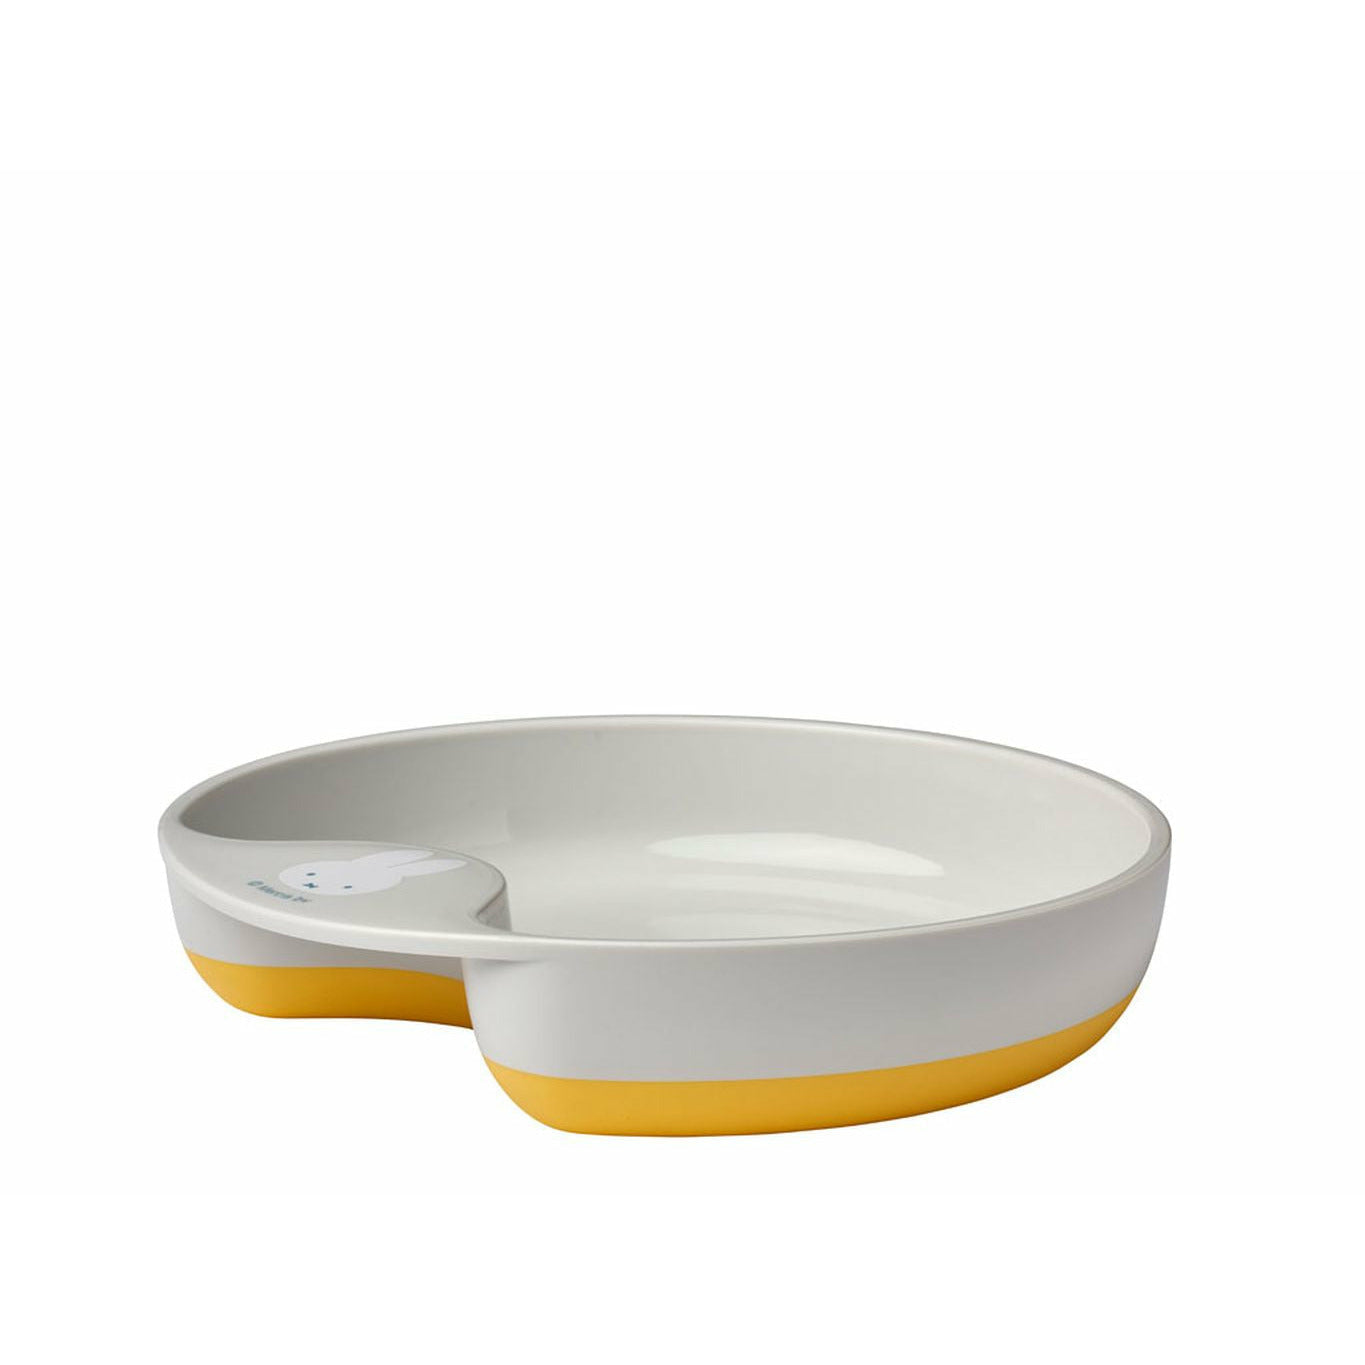 Mepal Mio Learning Plate, giallo